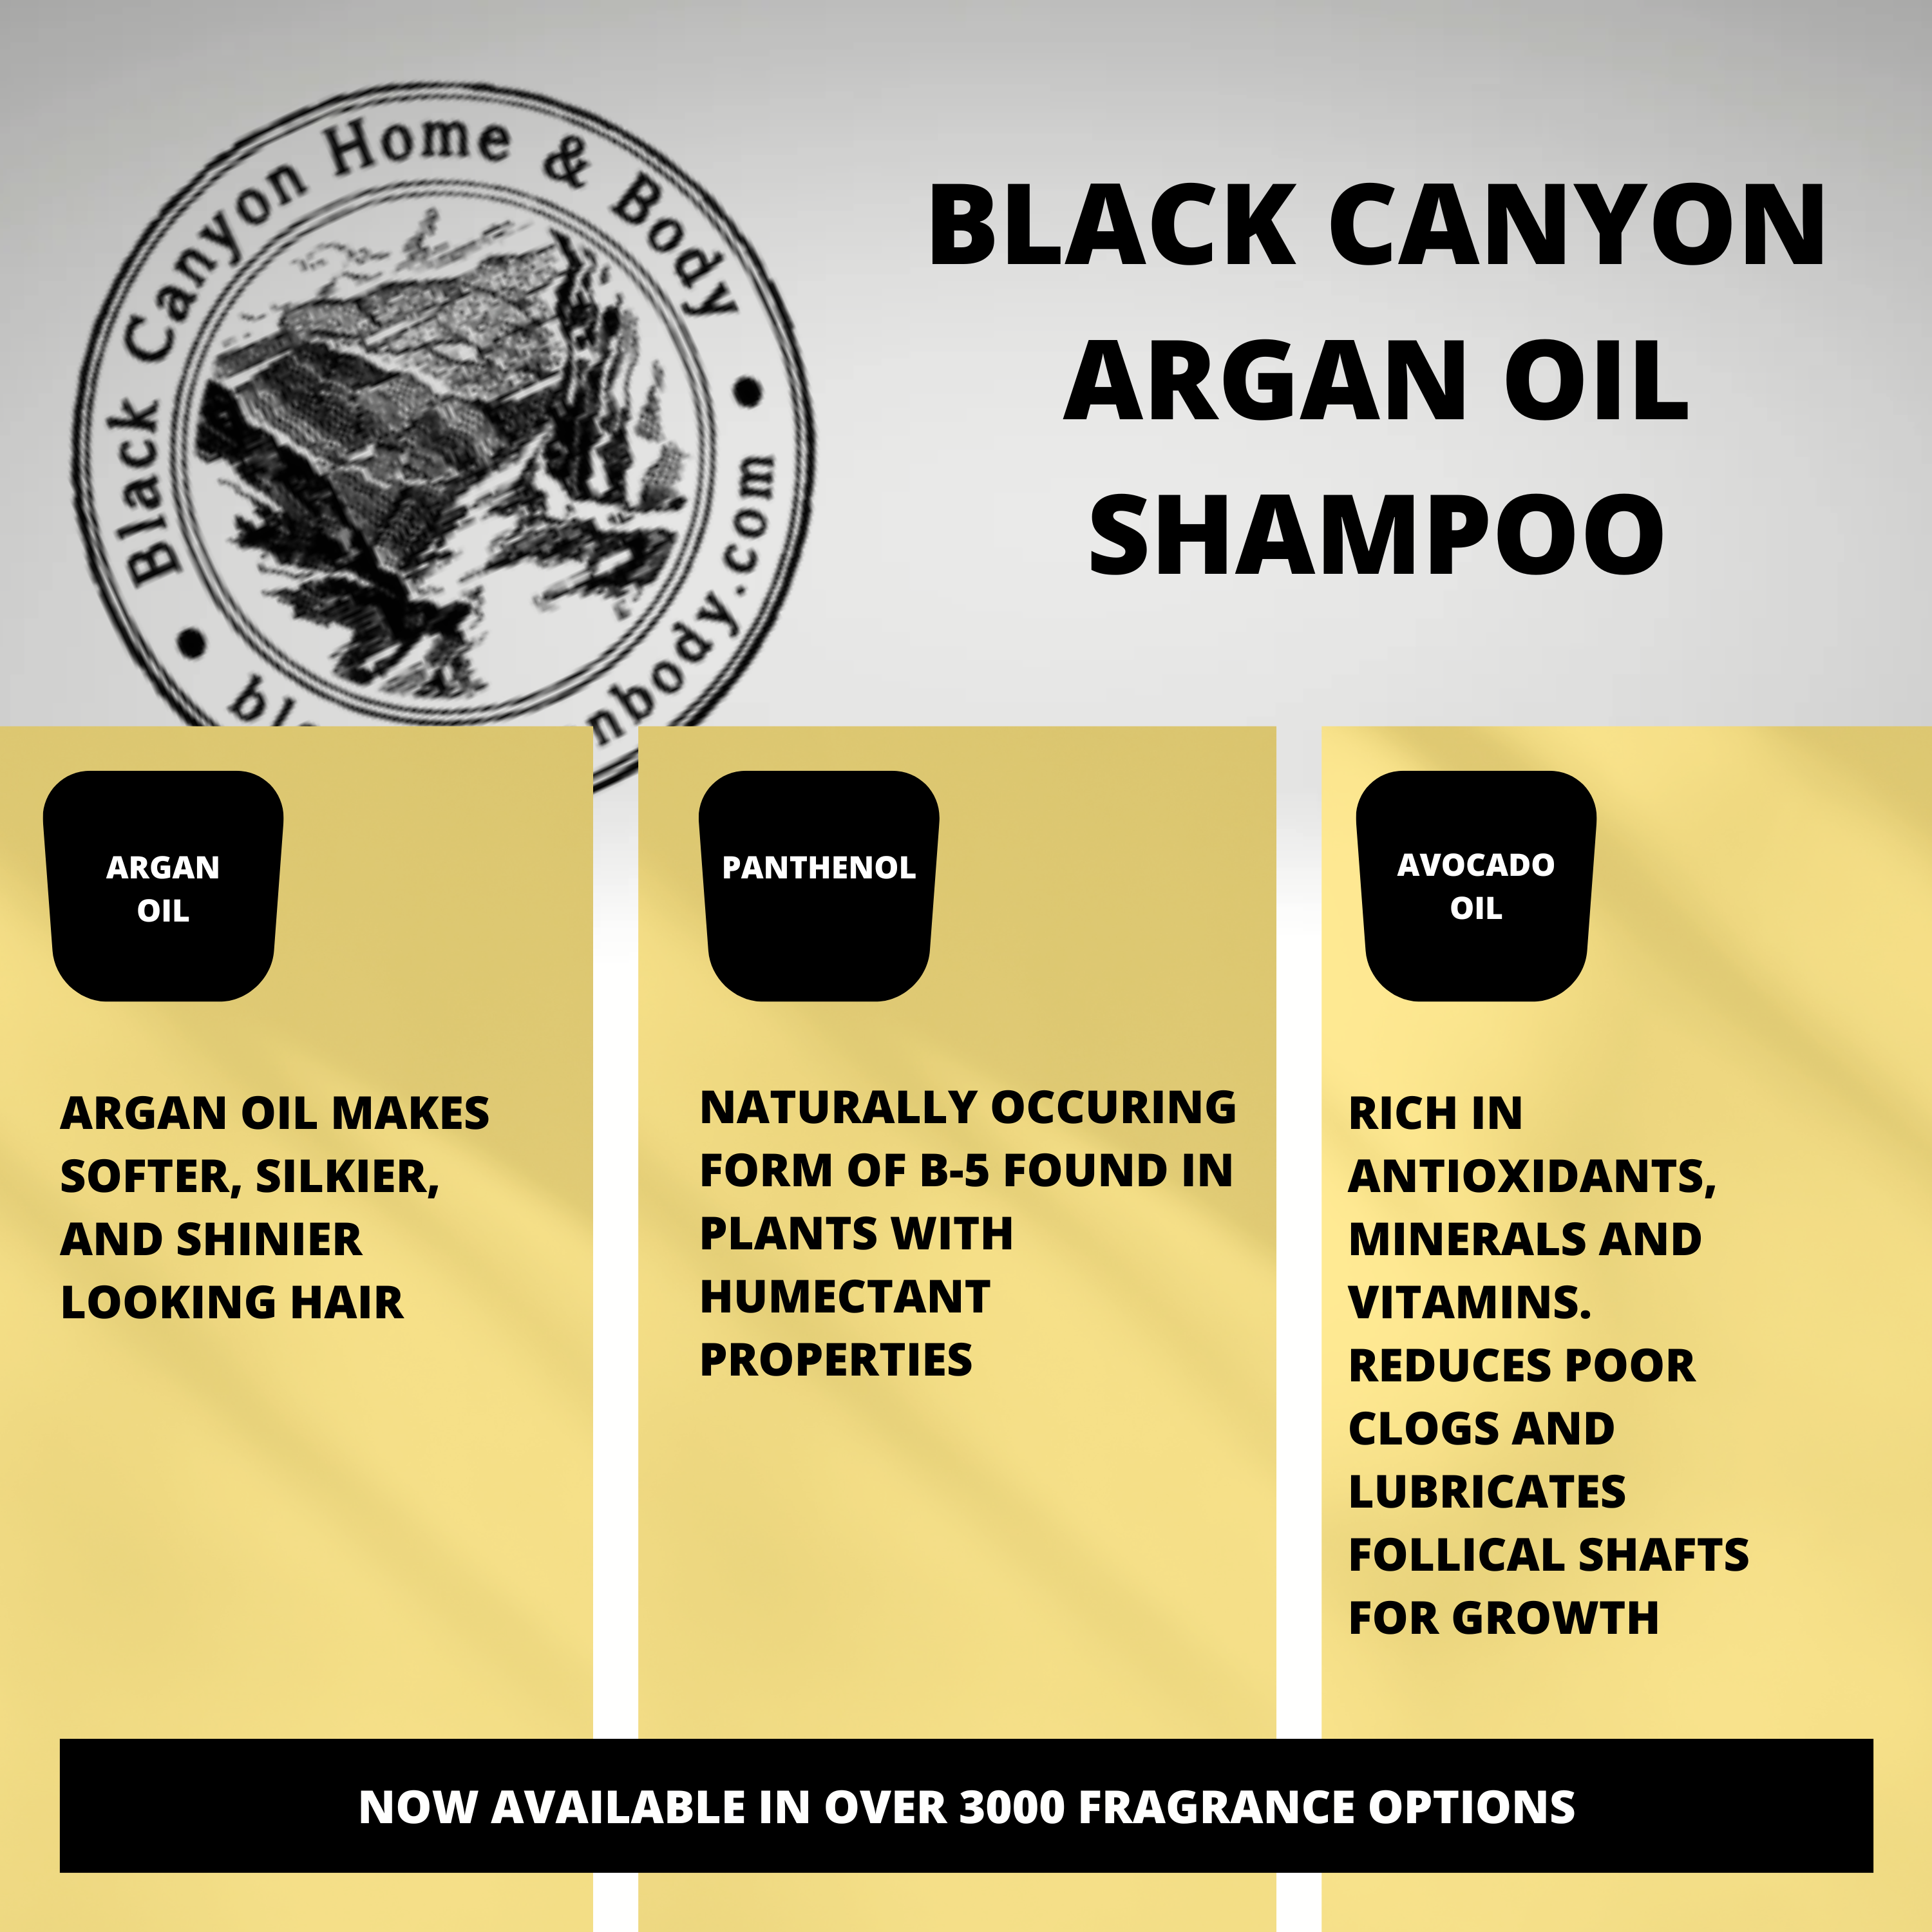 Black Canyon Bartlett Pear Scented Shampoo with Argan Oil